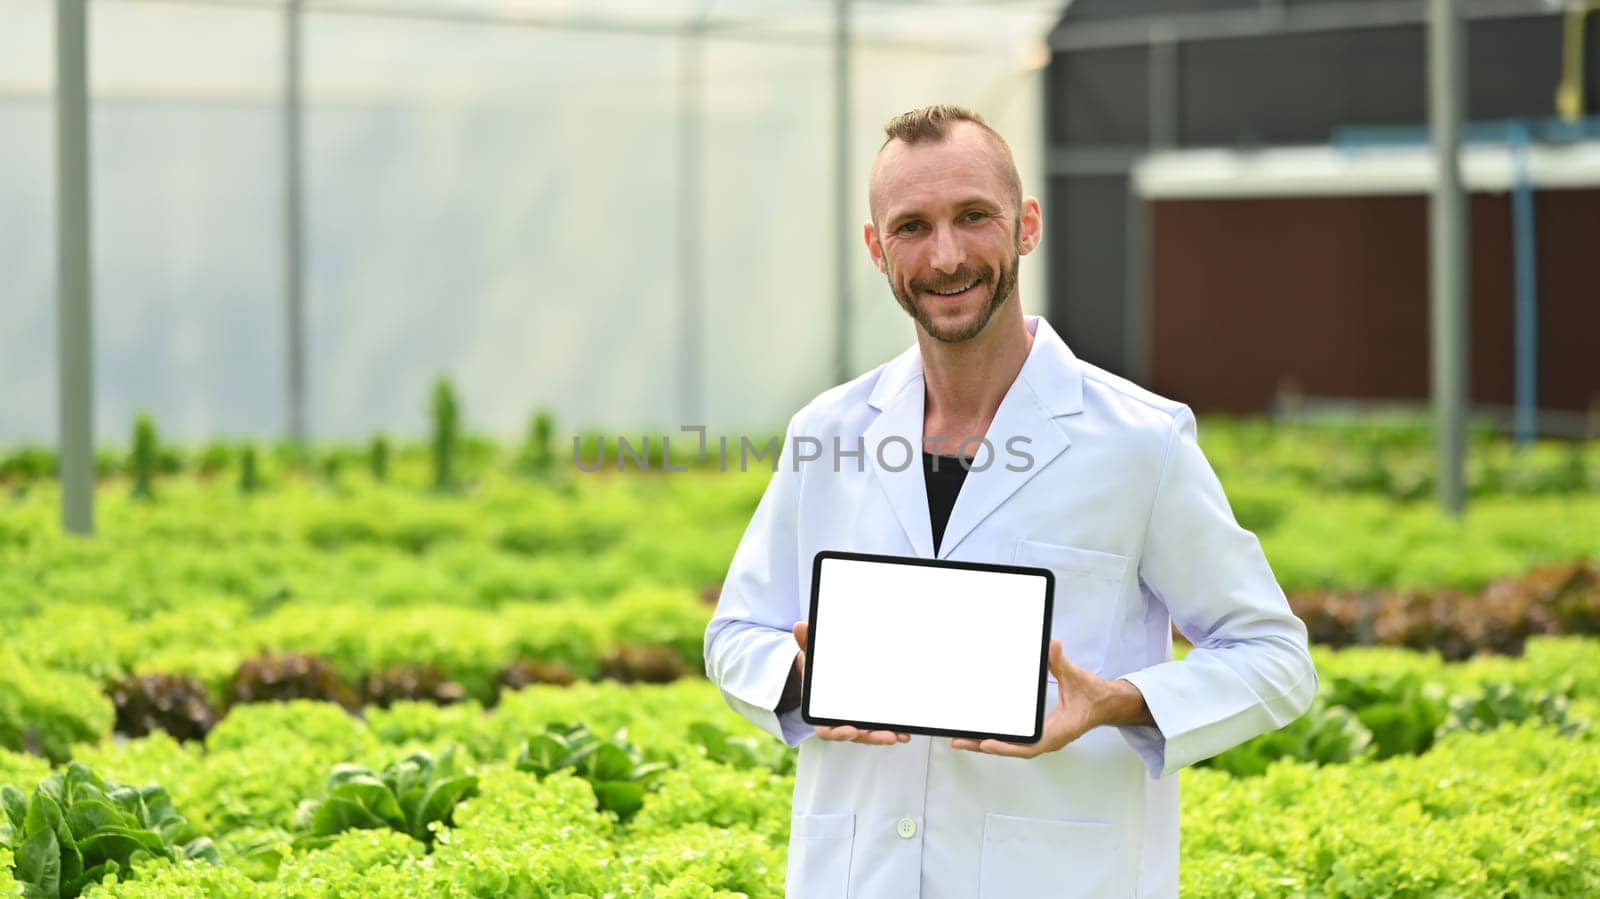 Portrait of caucasian male agricultural researcher showing digital tablet while standing in hydroponic greenhouse.